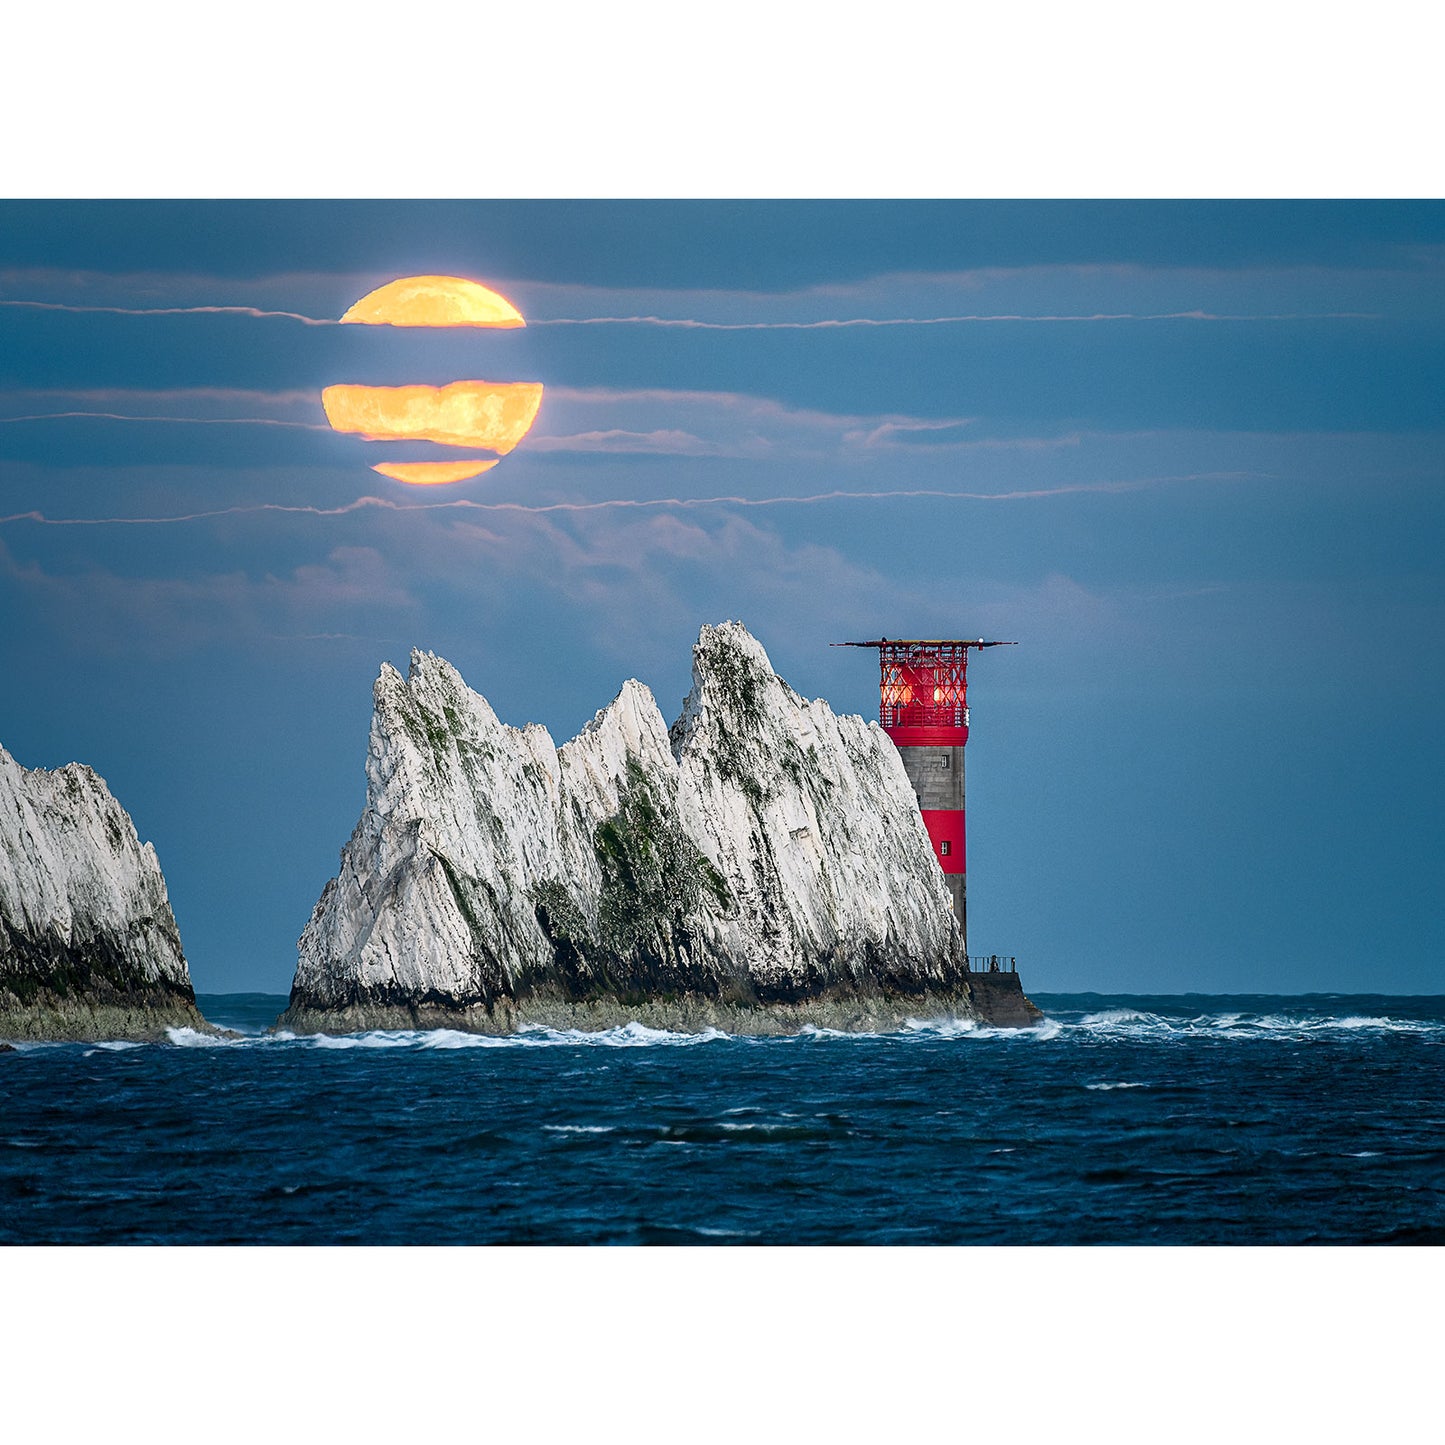 Full Moonset over The Needles rising beside coastal cliffs on the Isle of Wight, captured by Available Light Photography.